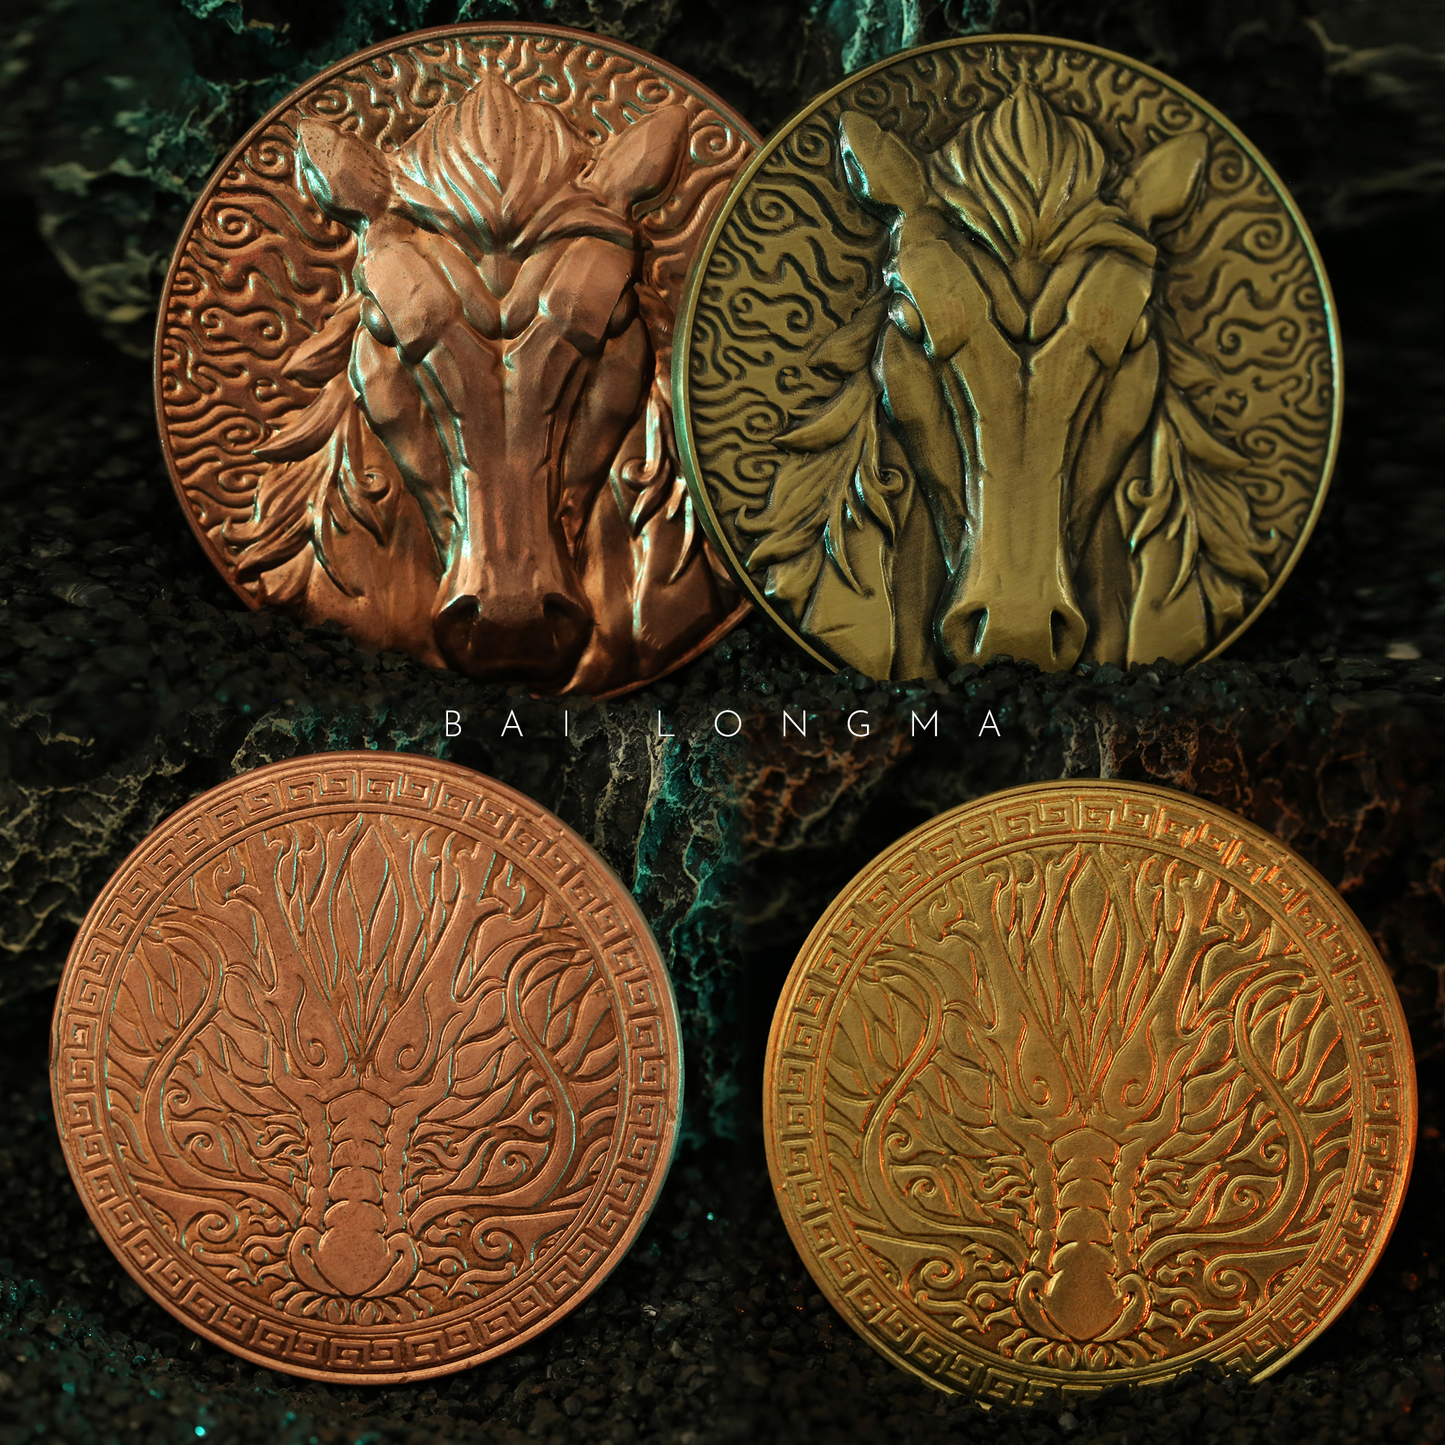 Journey to the West Collectible Metal Coins